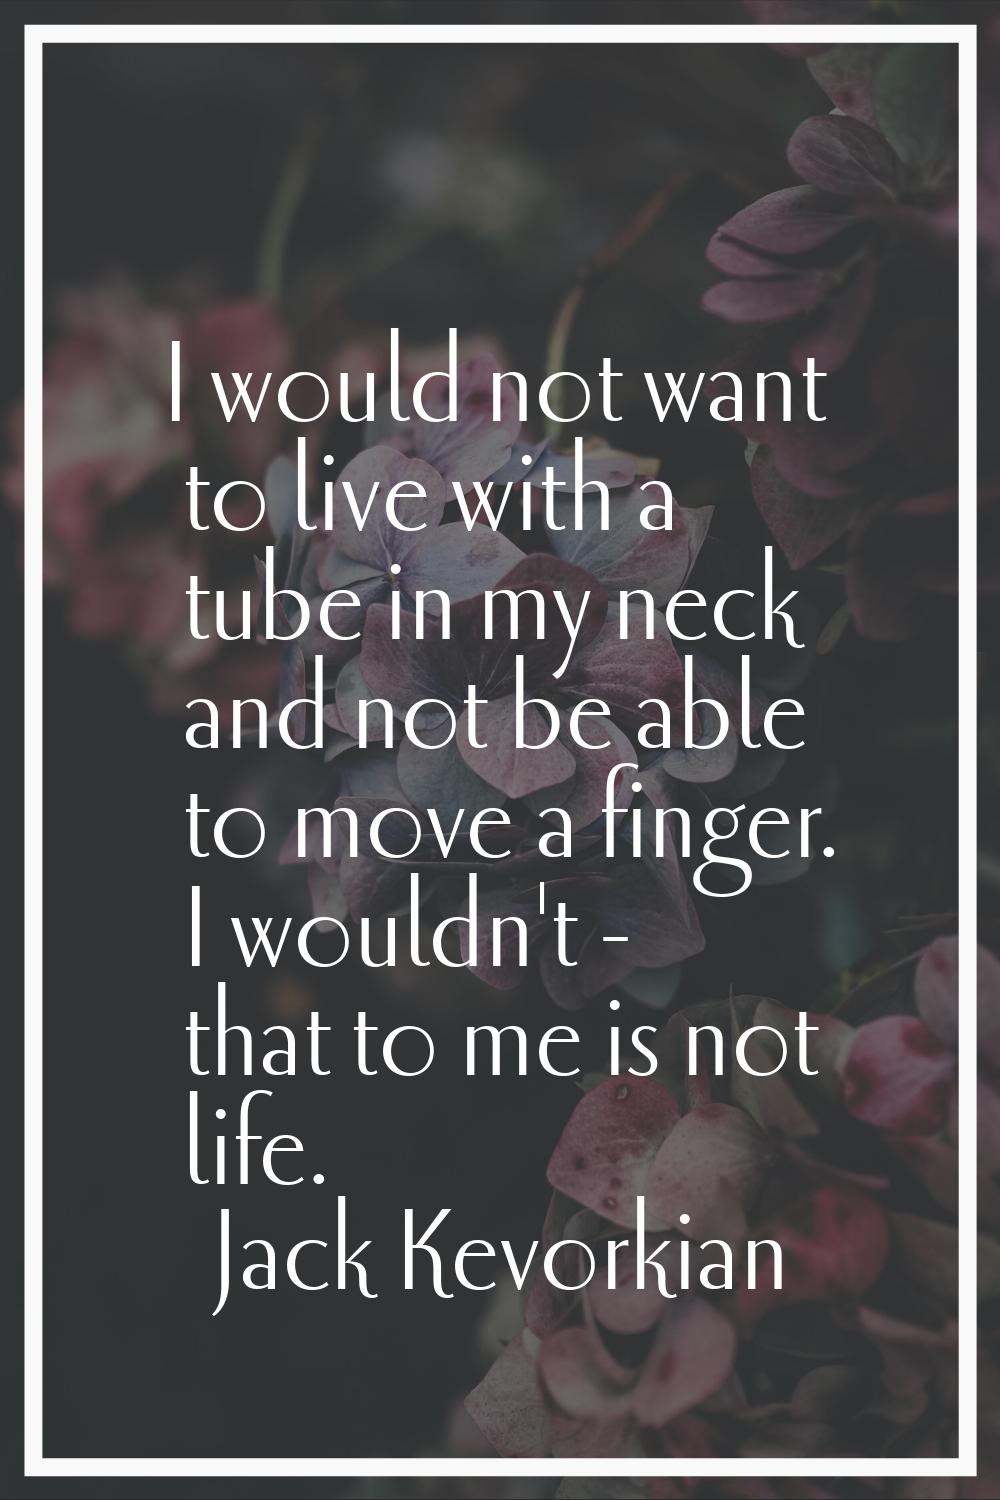 I would not want to live with a tube in my neck and not be able to move a finger. I wouldn't - that